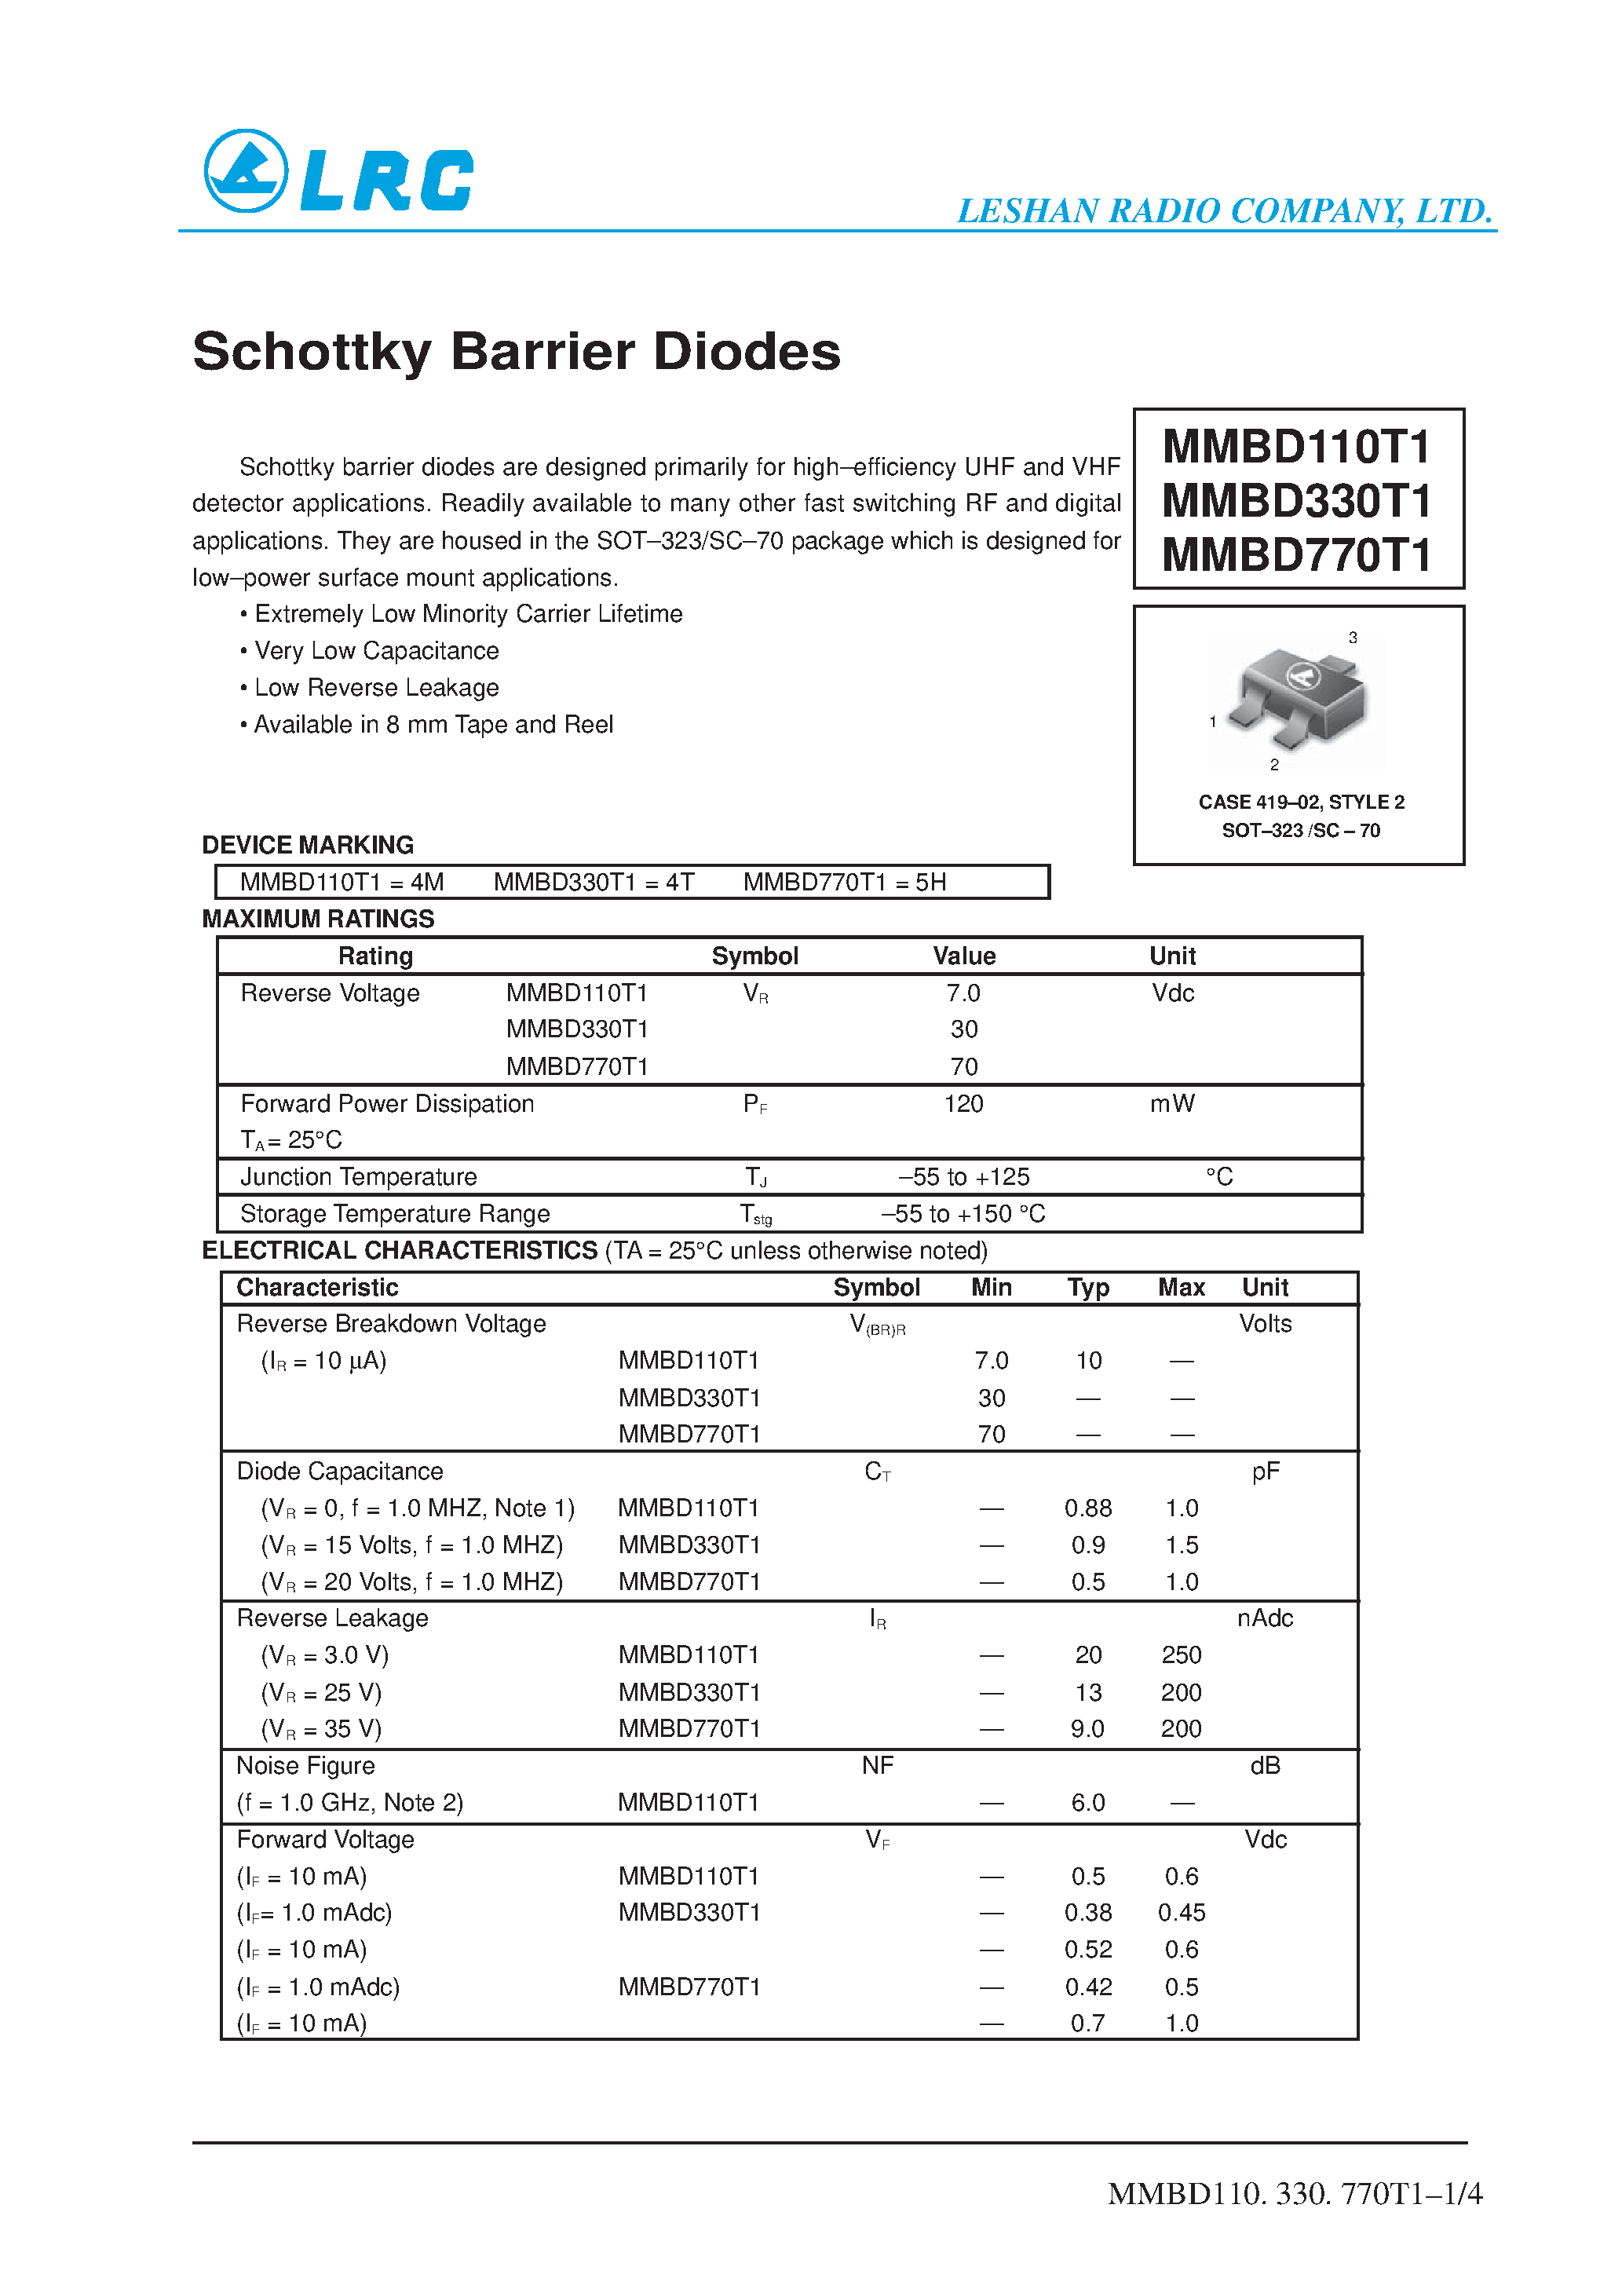 Даташит MMBD110T1 - Schottky Barrier Diodes страница 1